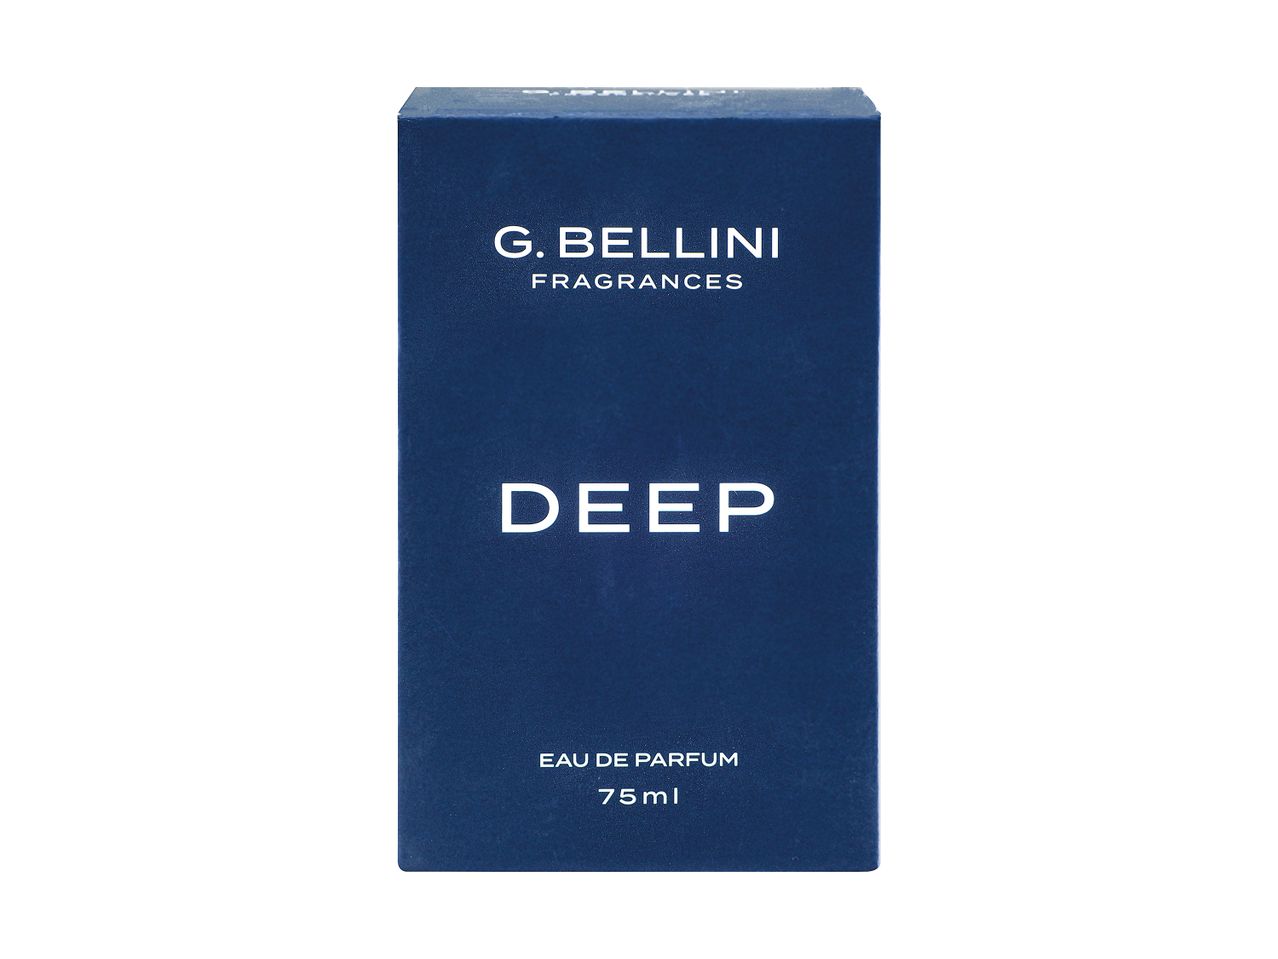 Go to full screen view: G.Bellini Fragrances Deep - Image 1